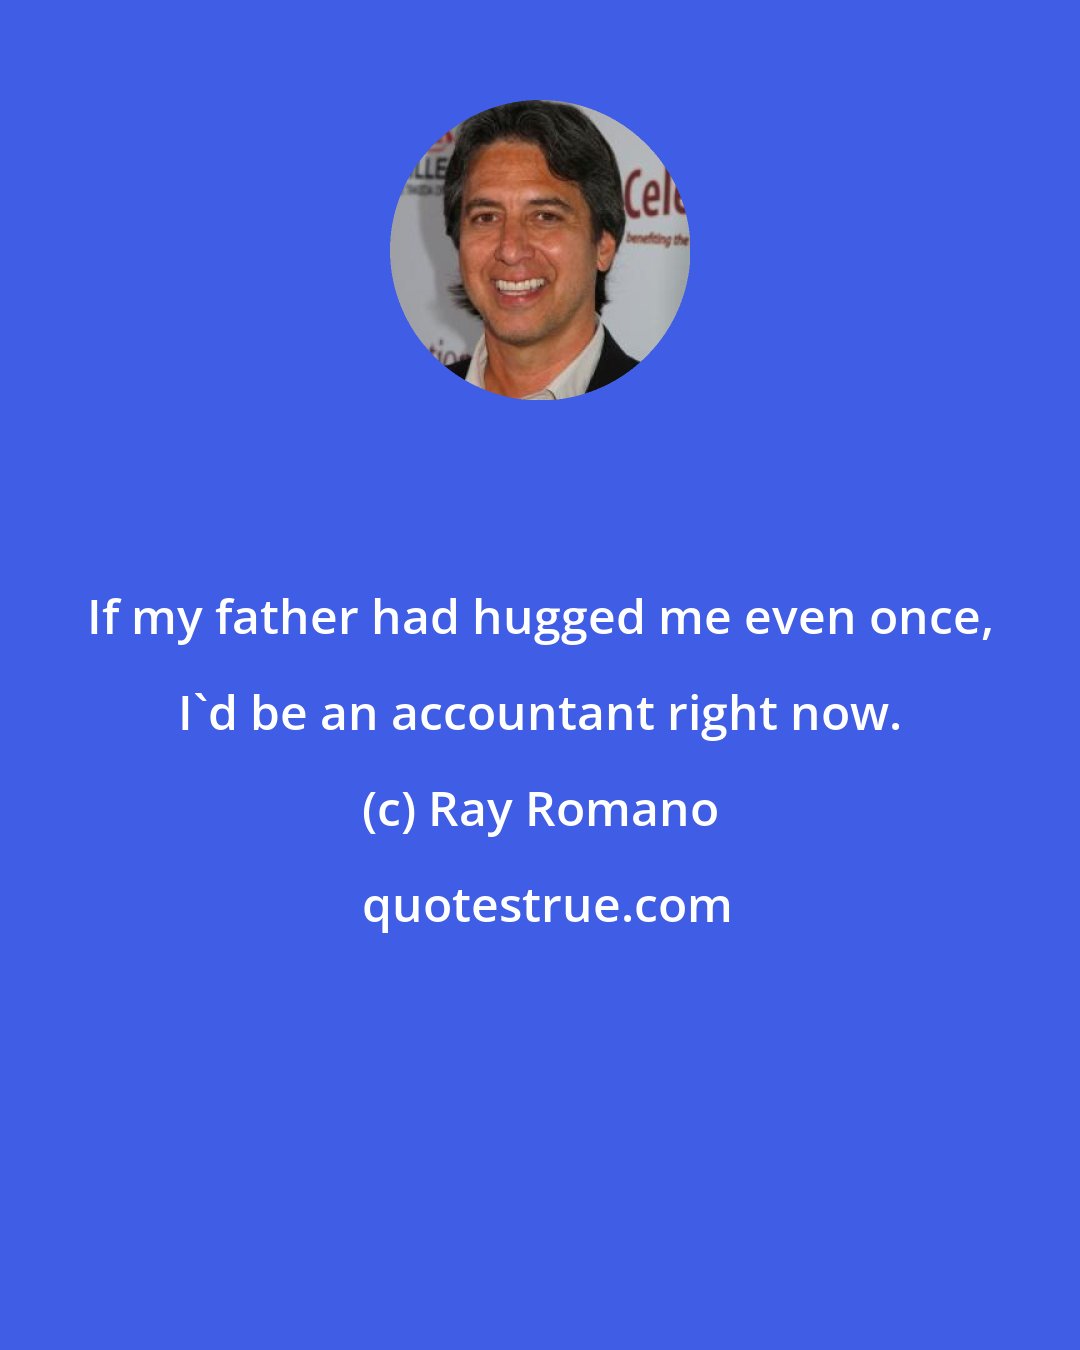 Ray Romano: If my father had hugged me even once, I'd be an accountant right now.